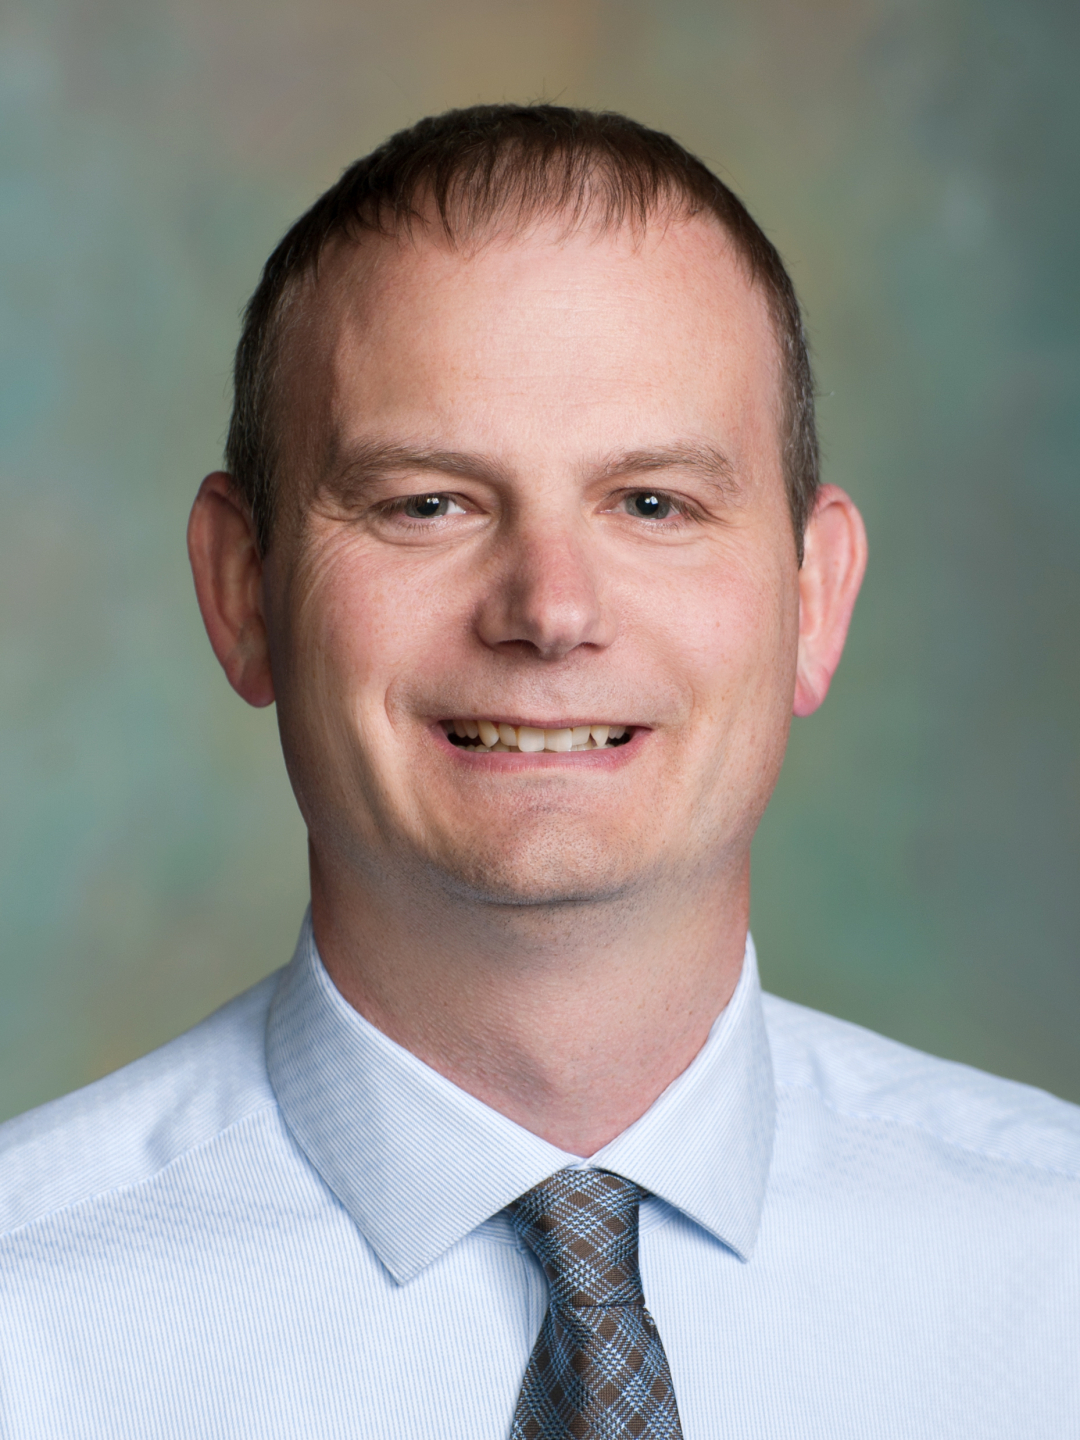 Chad Orn named the deputy director for planning at the North Dakota Department of Transportation (NDDOT) effective March 16.